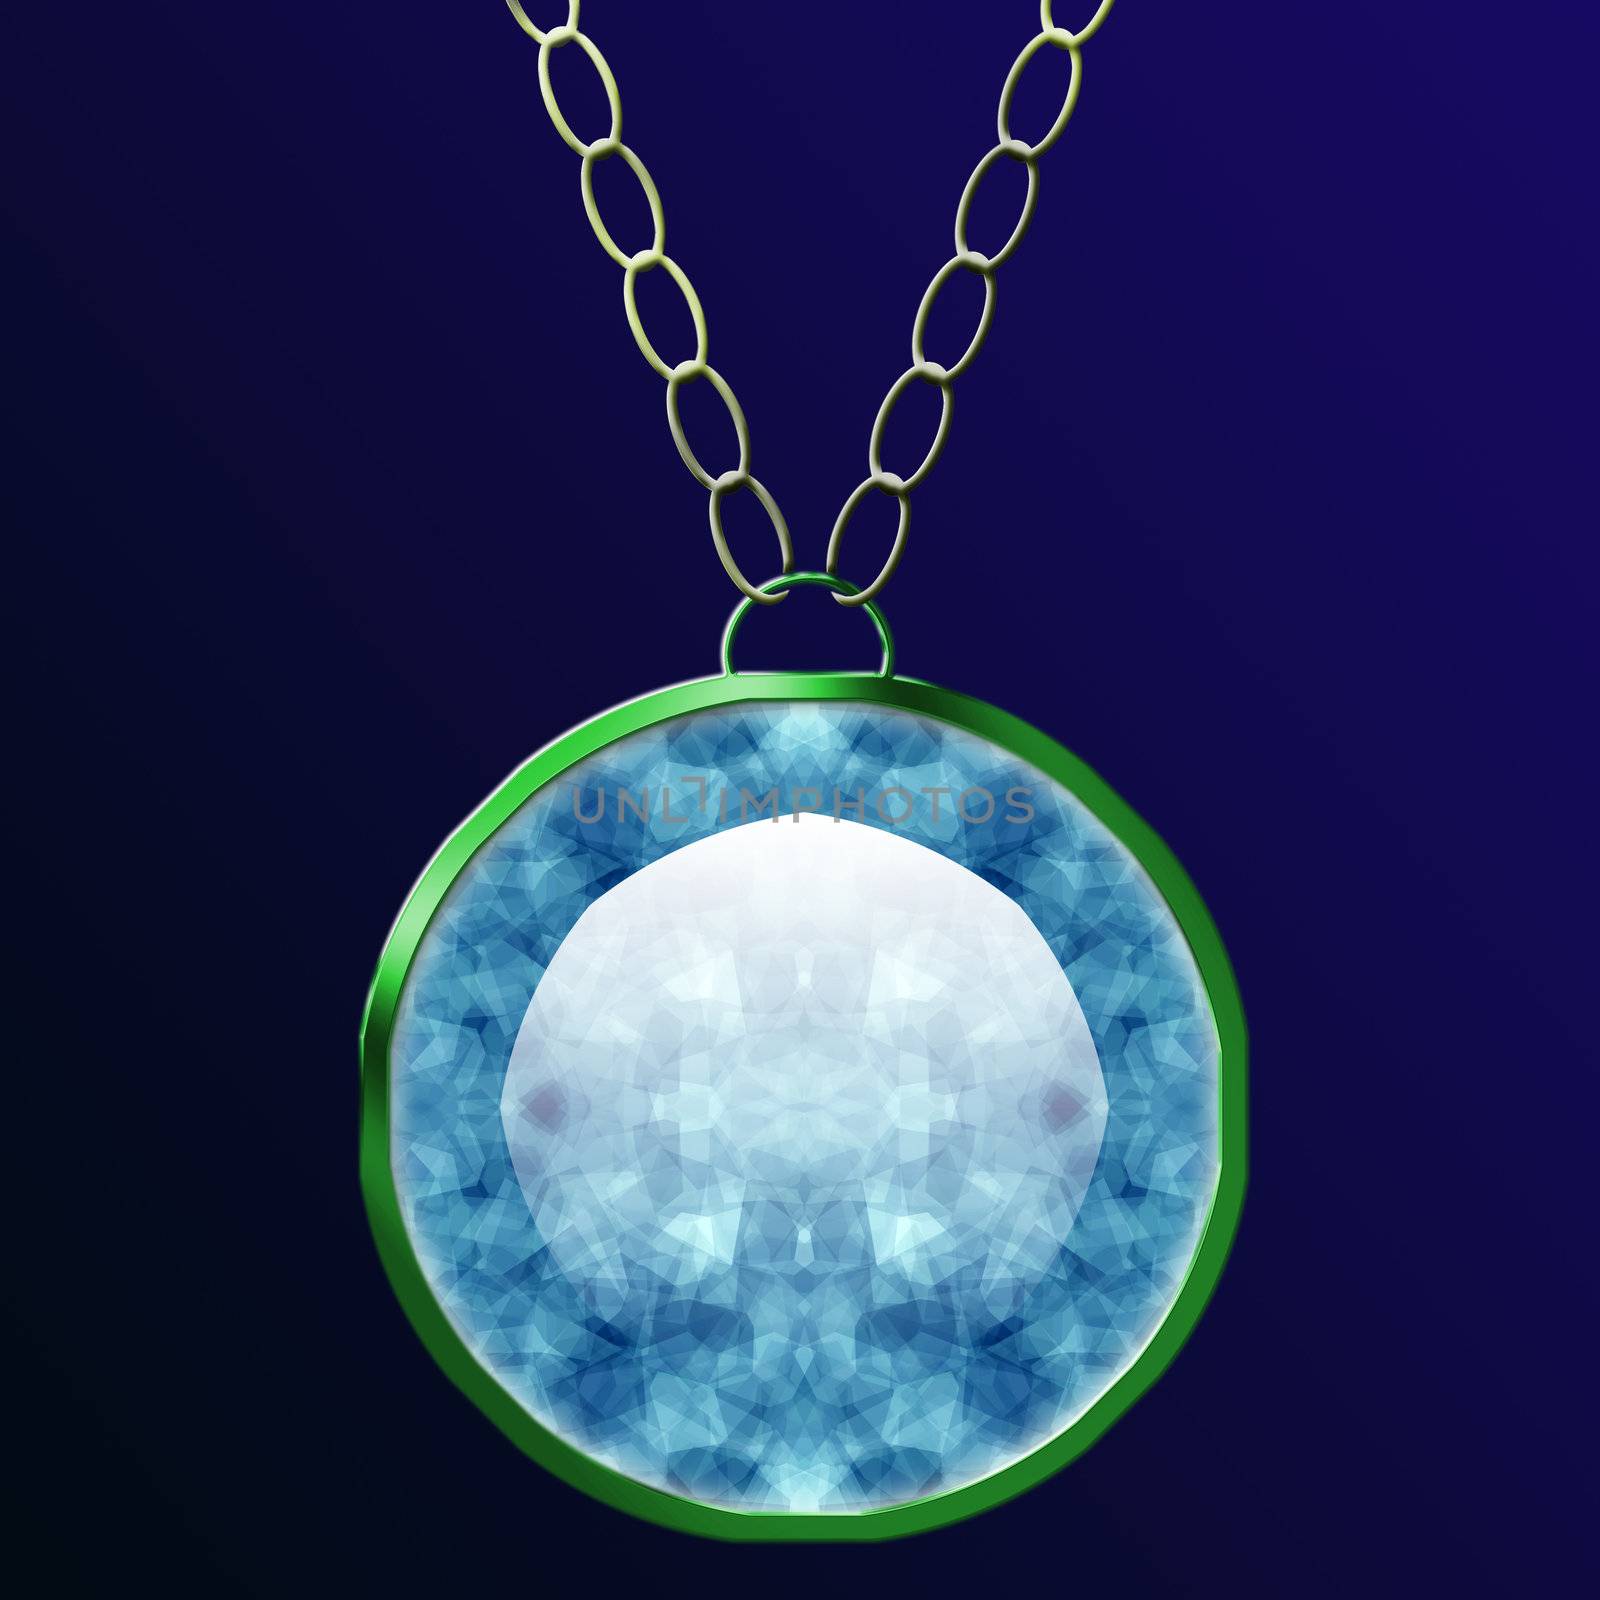 An illustration of a huge diamond necklace, with a tint of blue inside